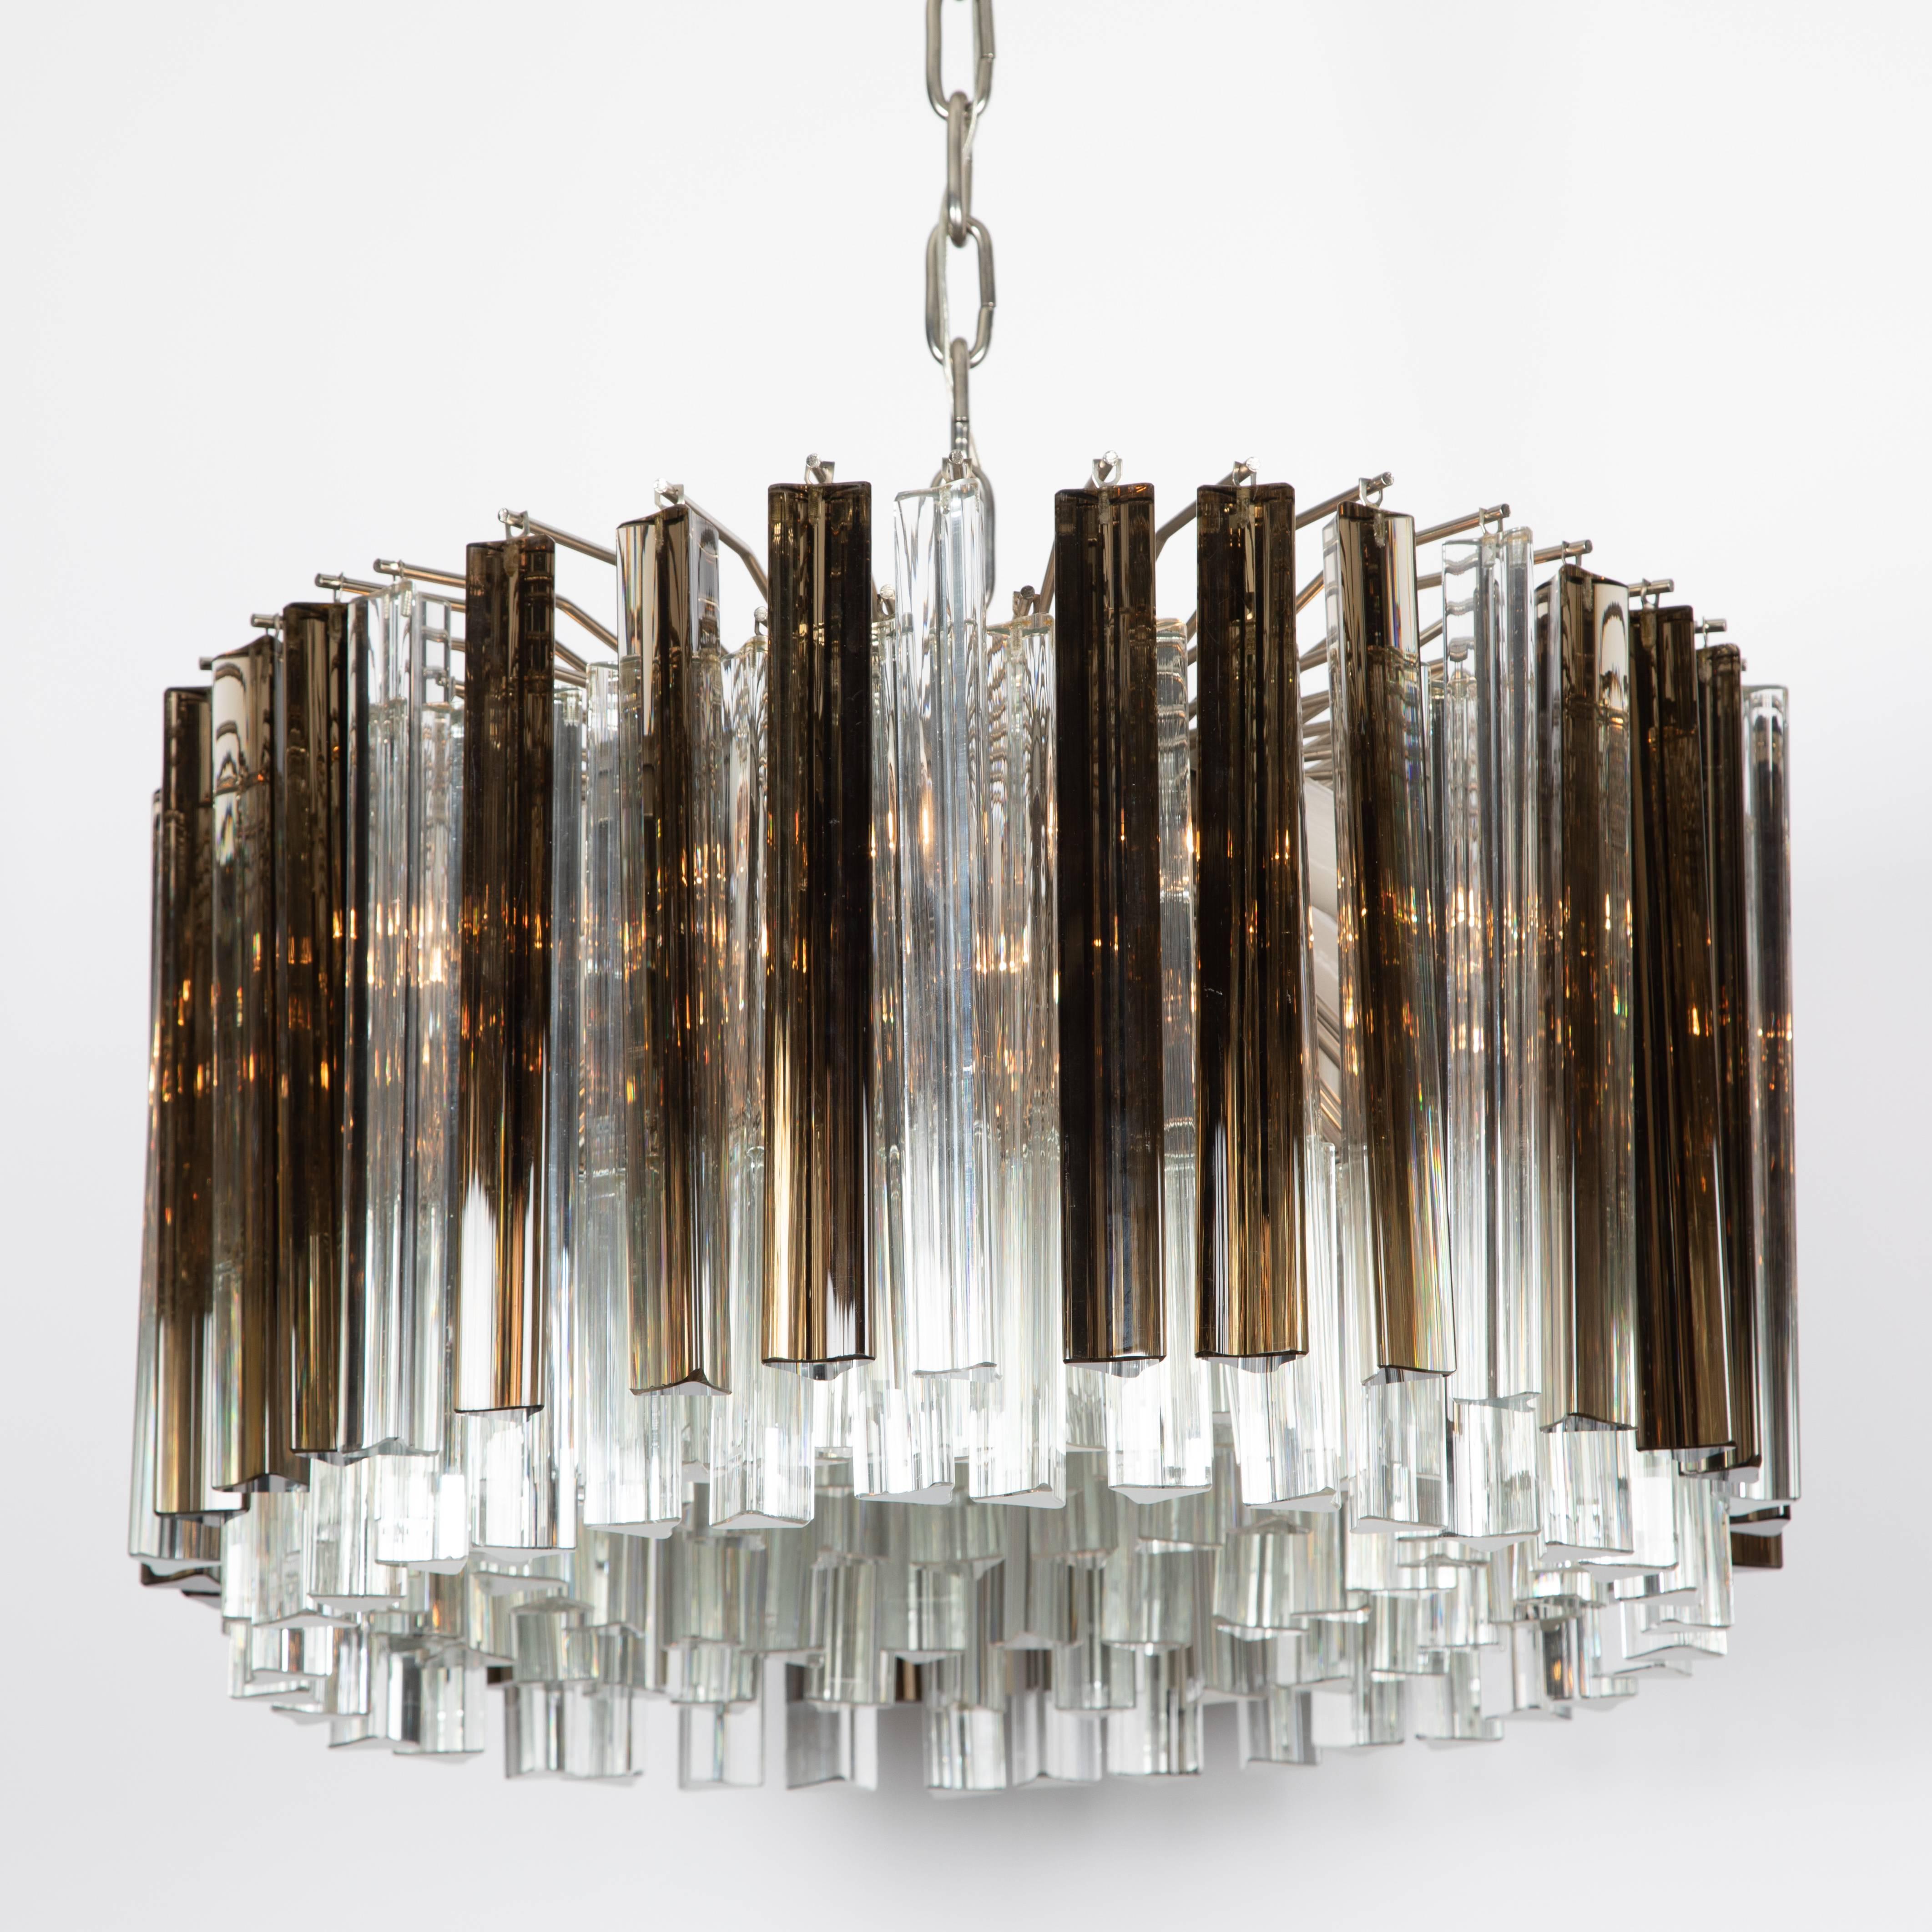 Fabulous 1970s Italian prism chandelier consisting of eight rings of densely spaced triangular crystals of two different lengths in a mixture of clear and smoked glass. Large and dramatic, this light will add sparkle to any setting. Brushed chrome